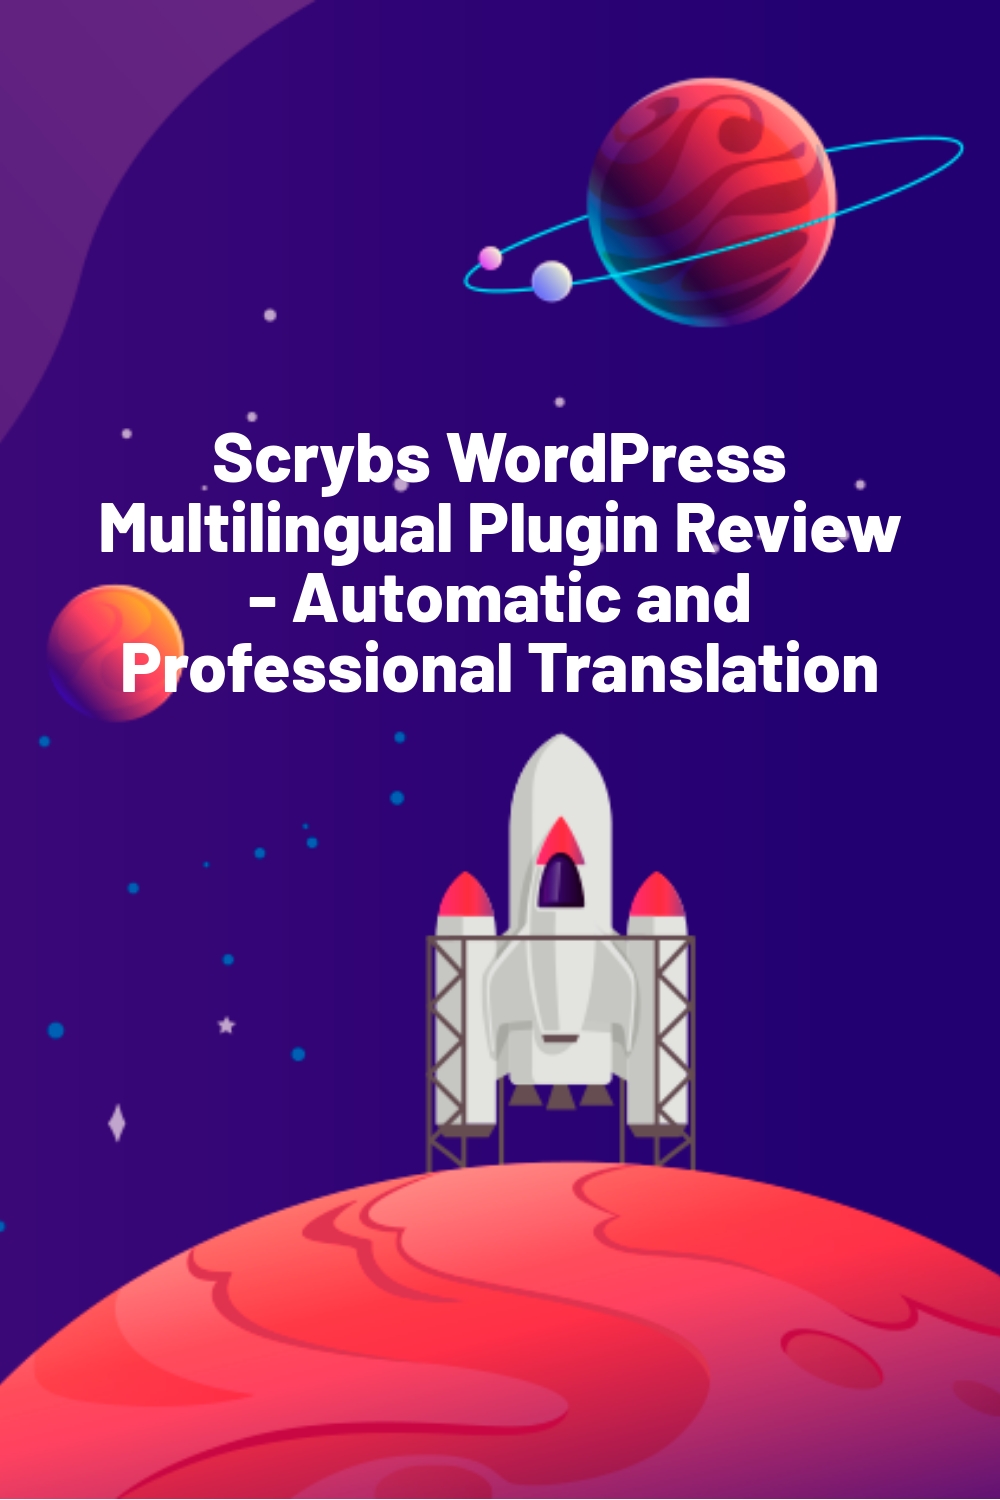 Scrybs WordPress Multilingual Plugin Review – Automatic and Professional Translation